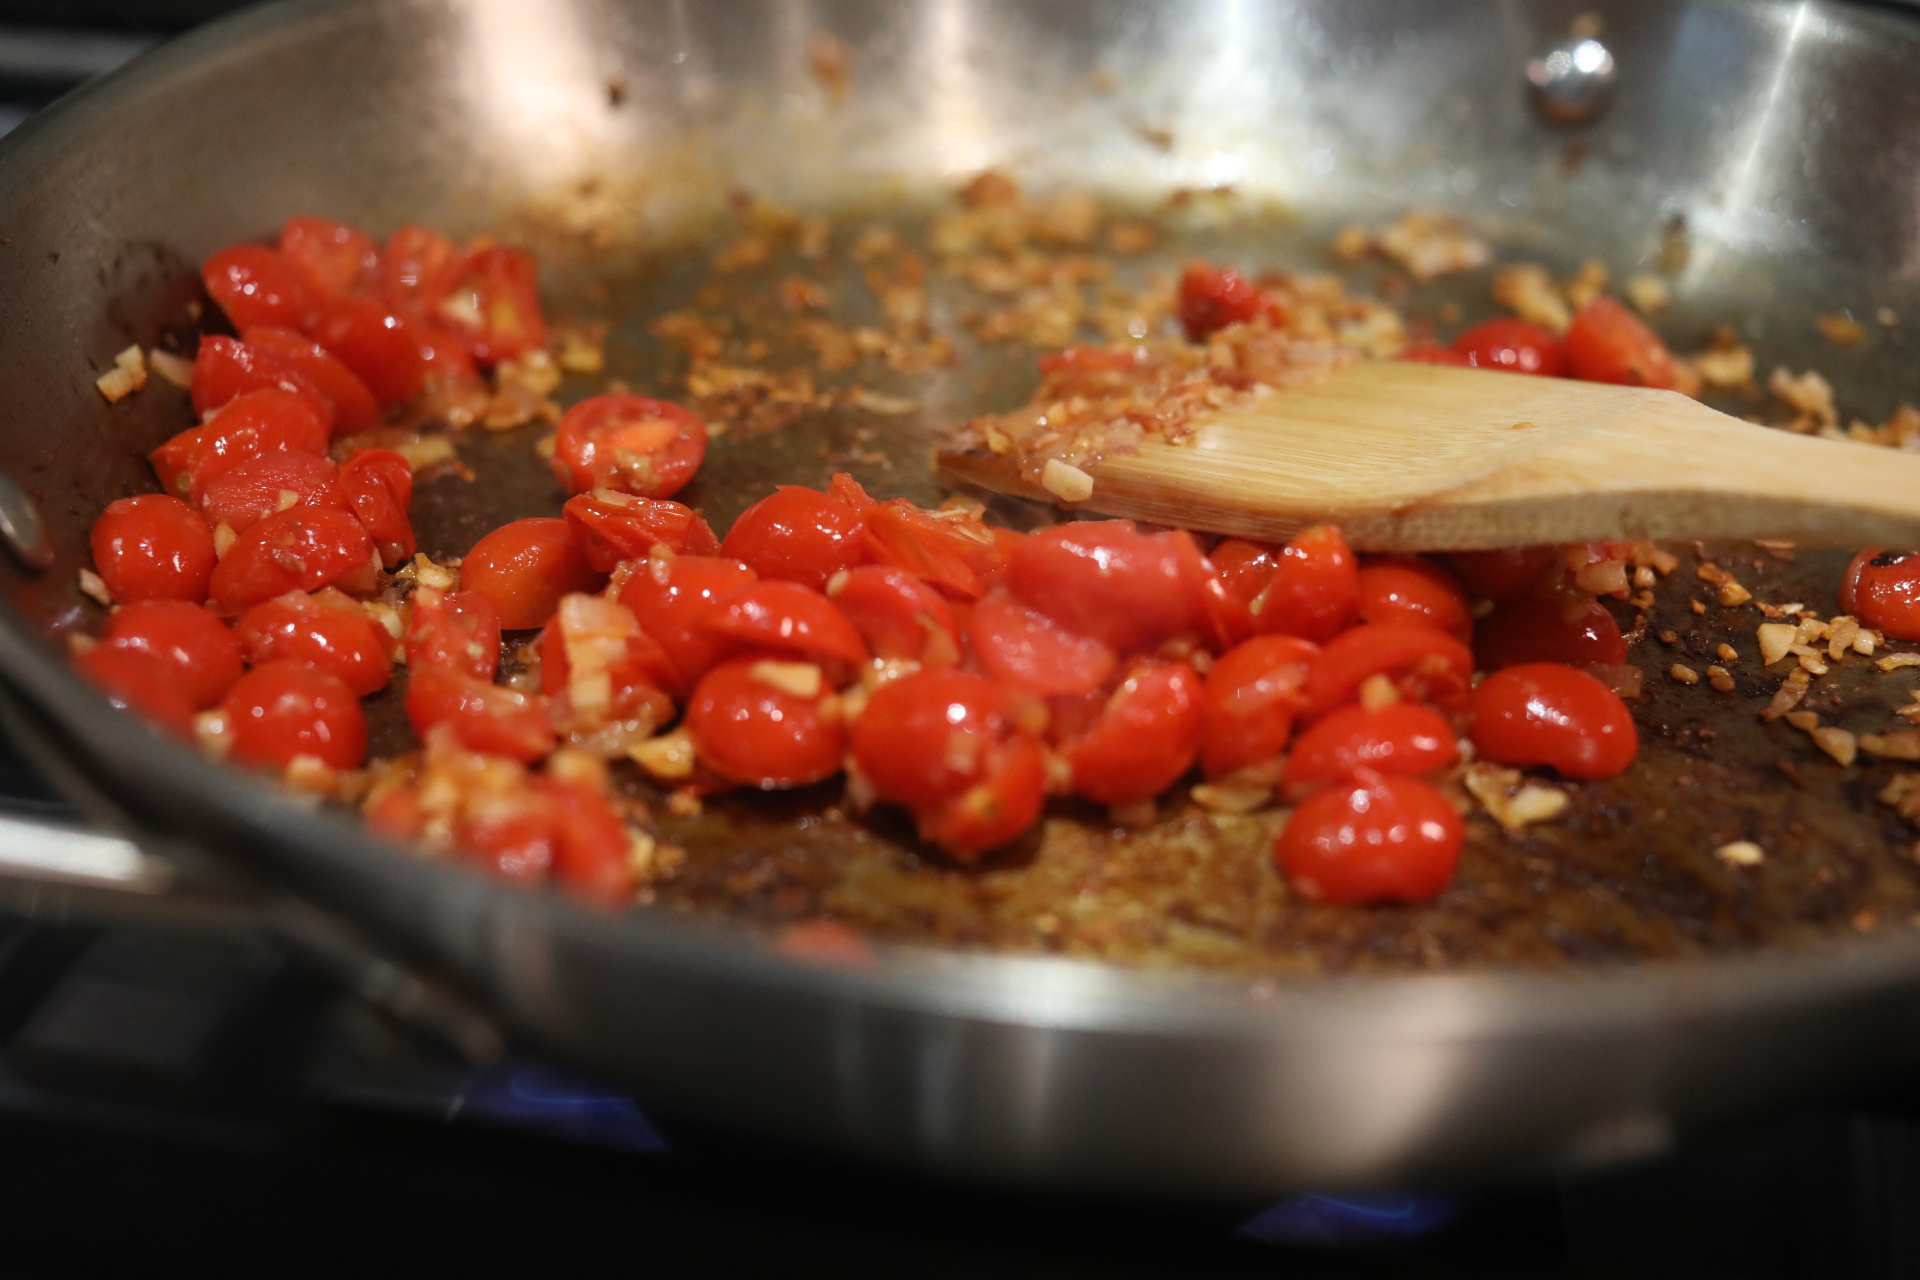 Cherry tomatoes with sauteed shallot and garlic sautéing in a metal pan with wooden spoon.